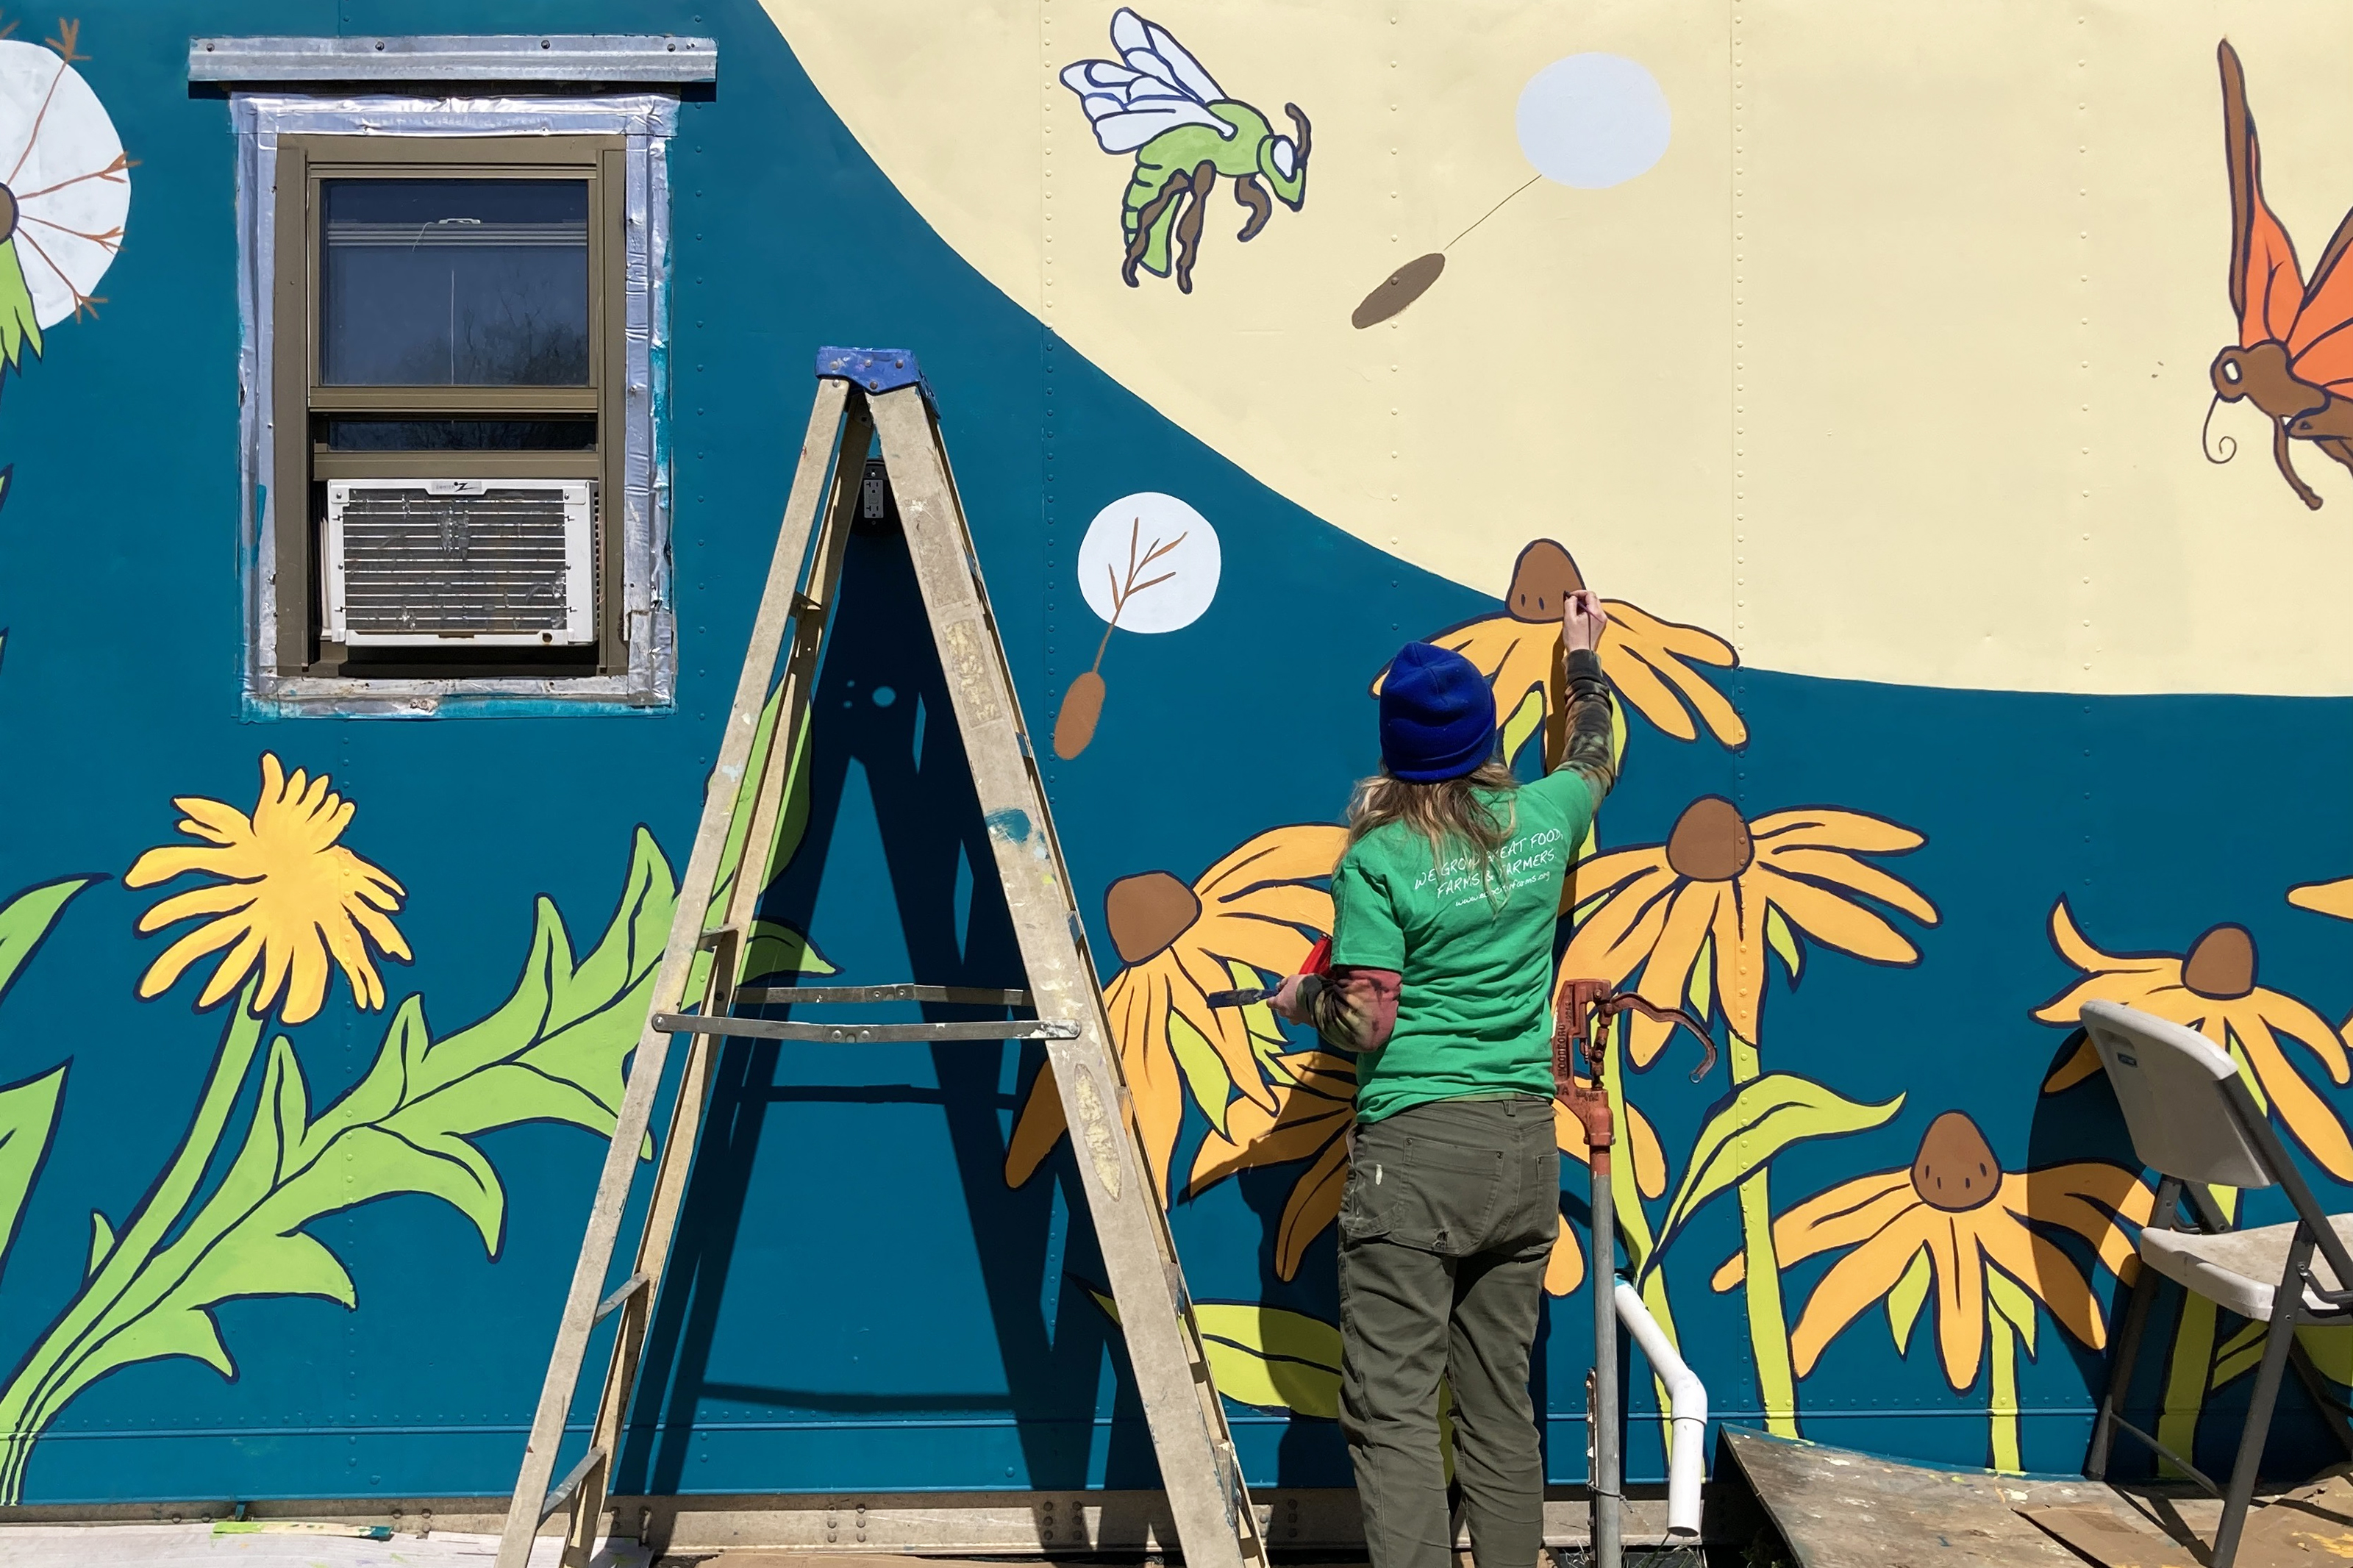 Graduate student Simone nemes stands on a ladder and paints flowers on a mural